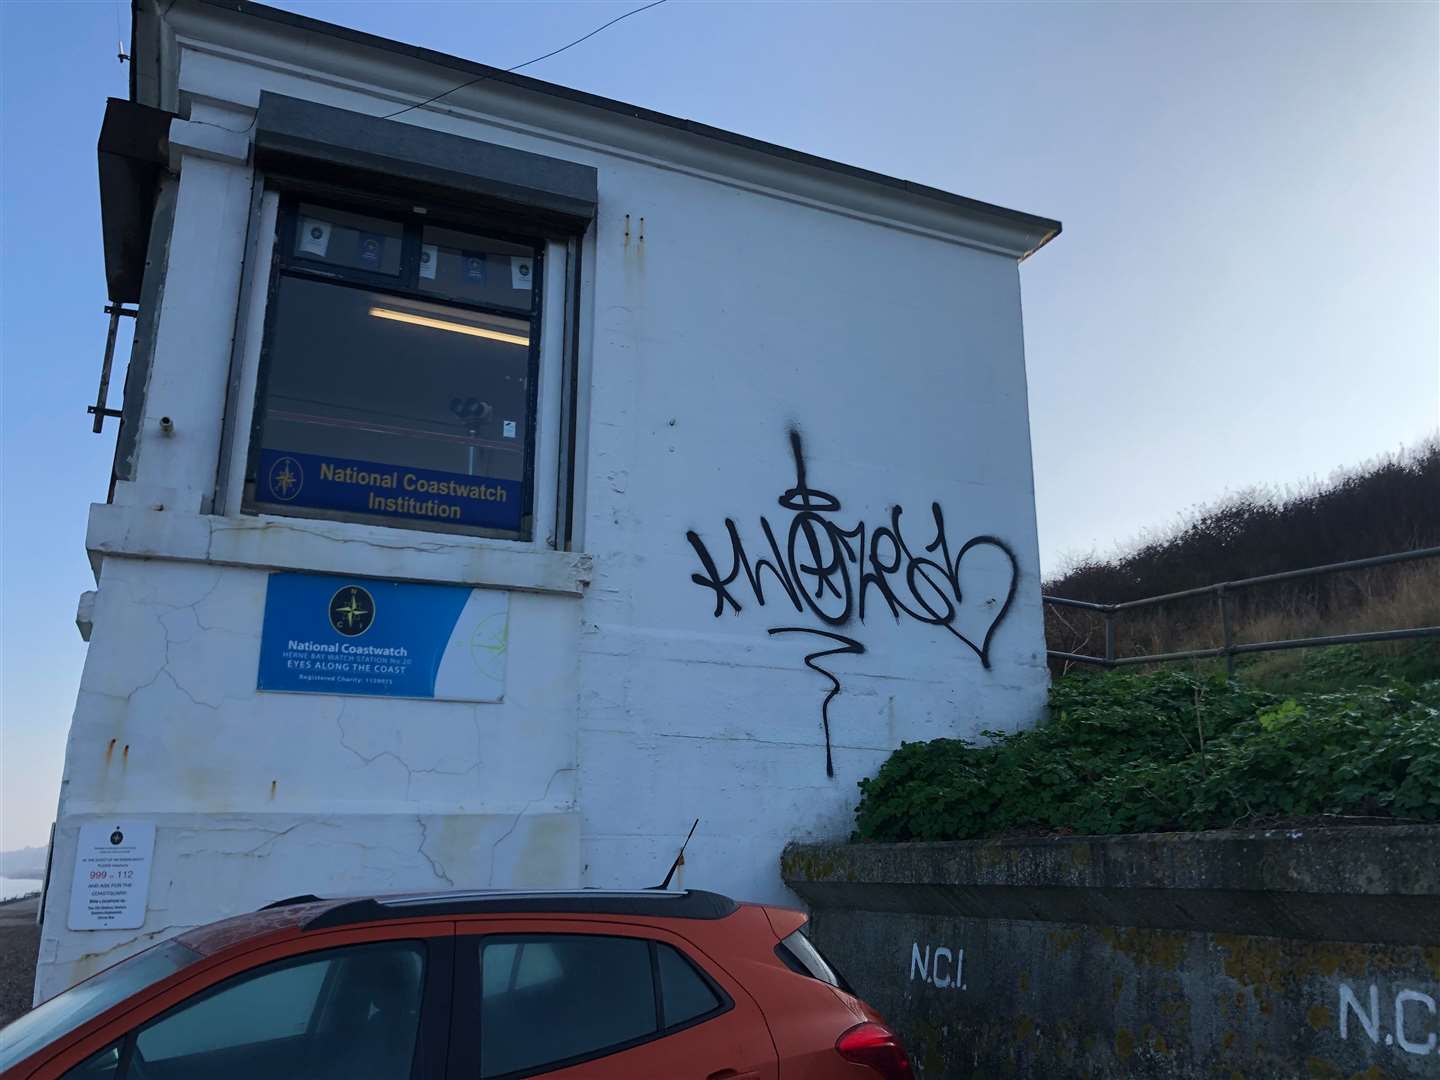 The incident comes as activists believe there has been a rise in graffitiing across Herne Bay